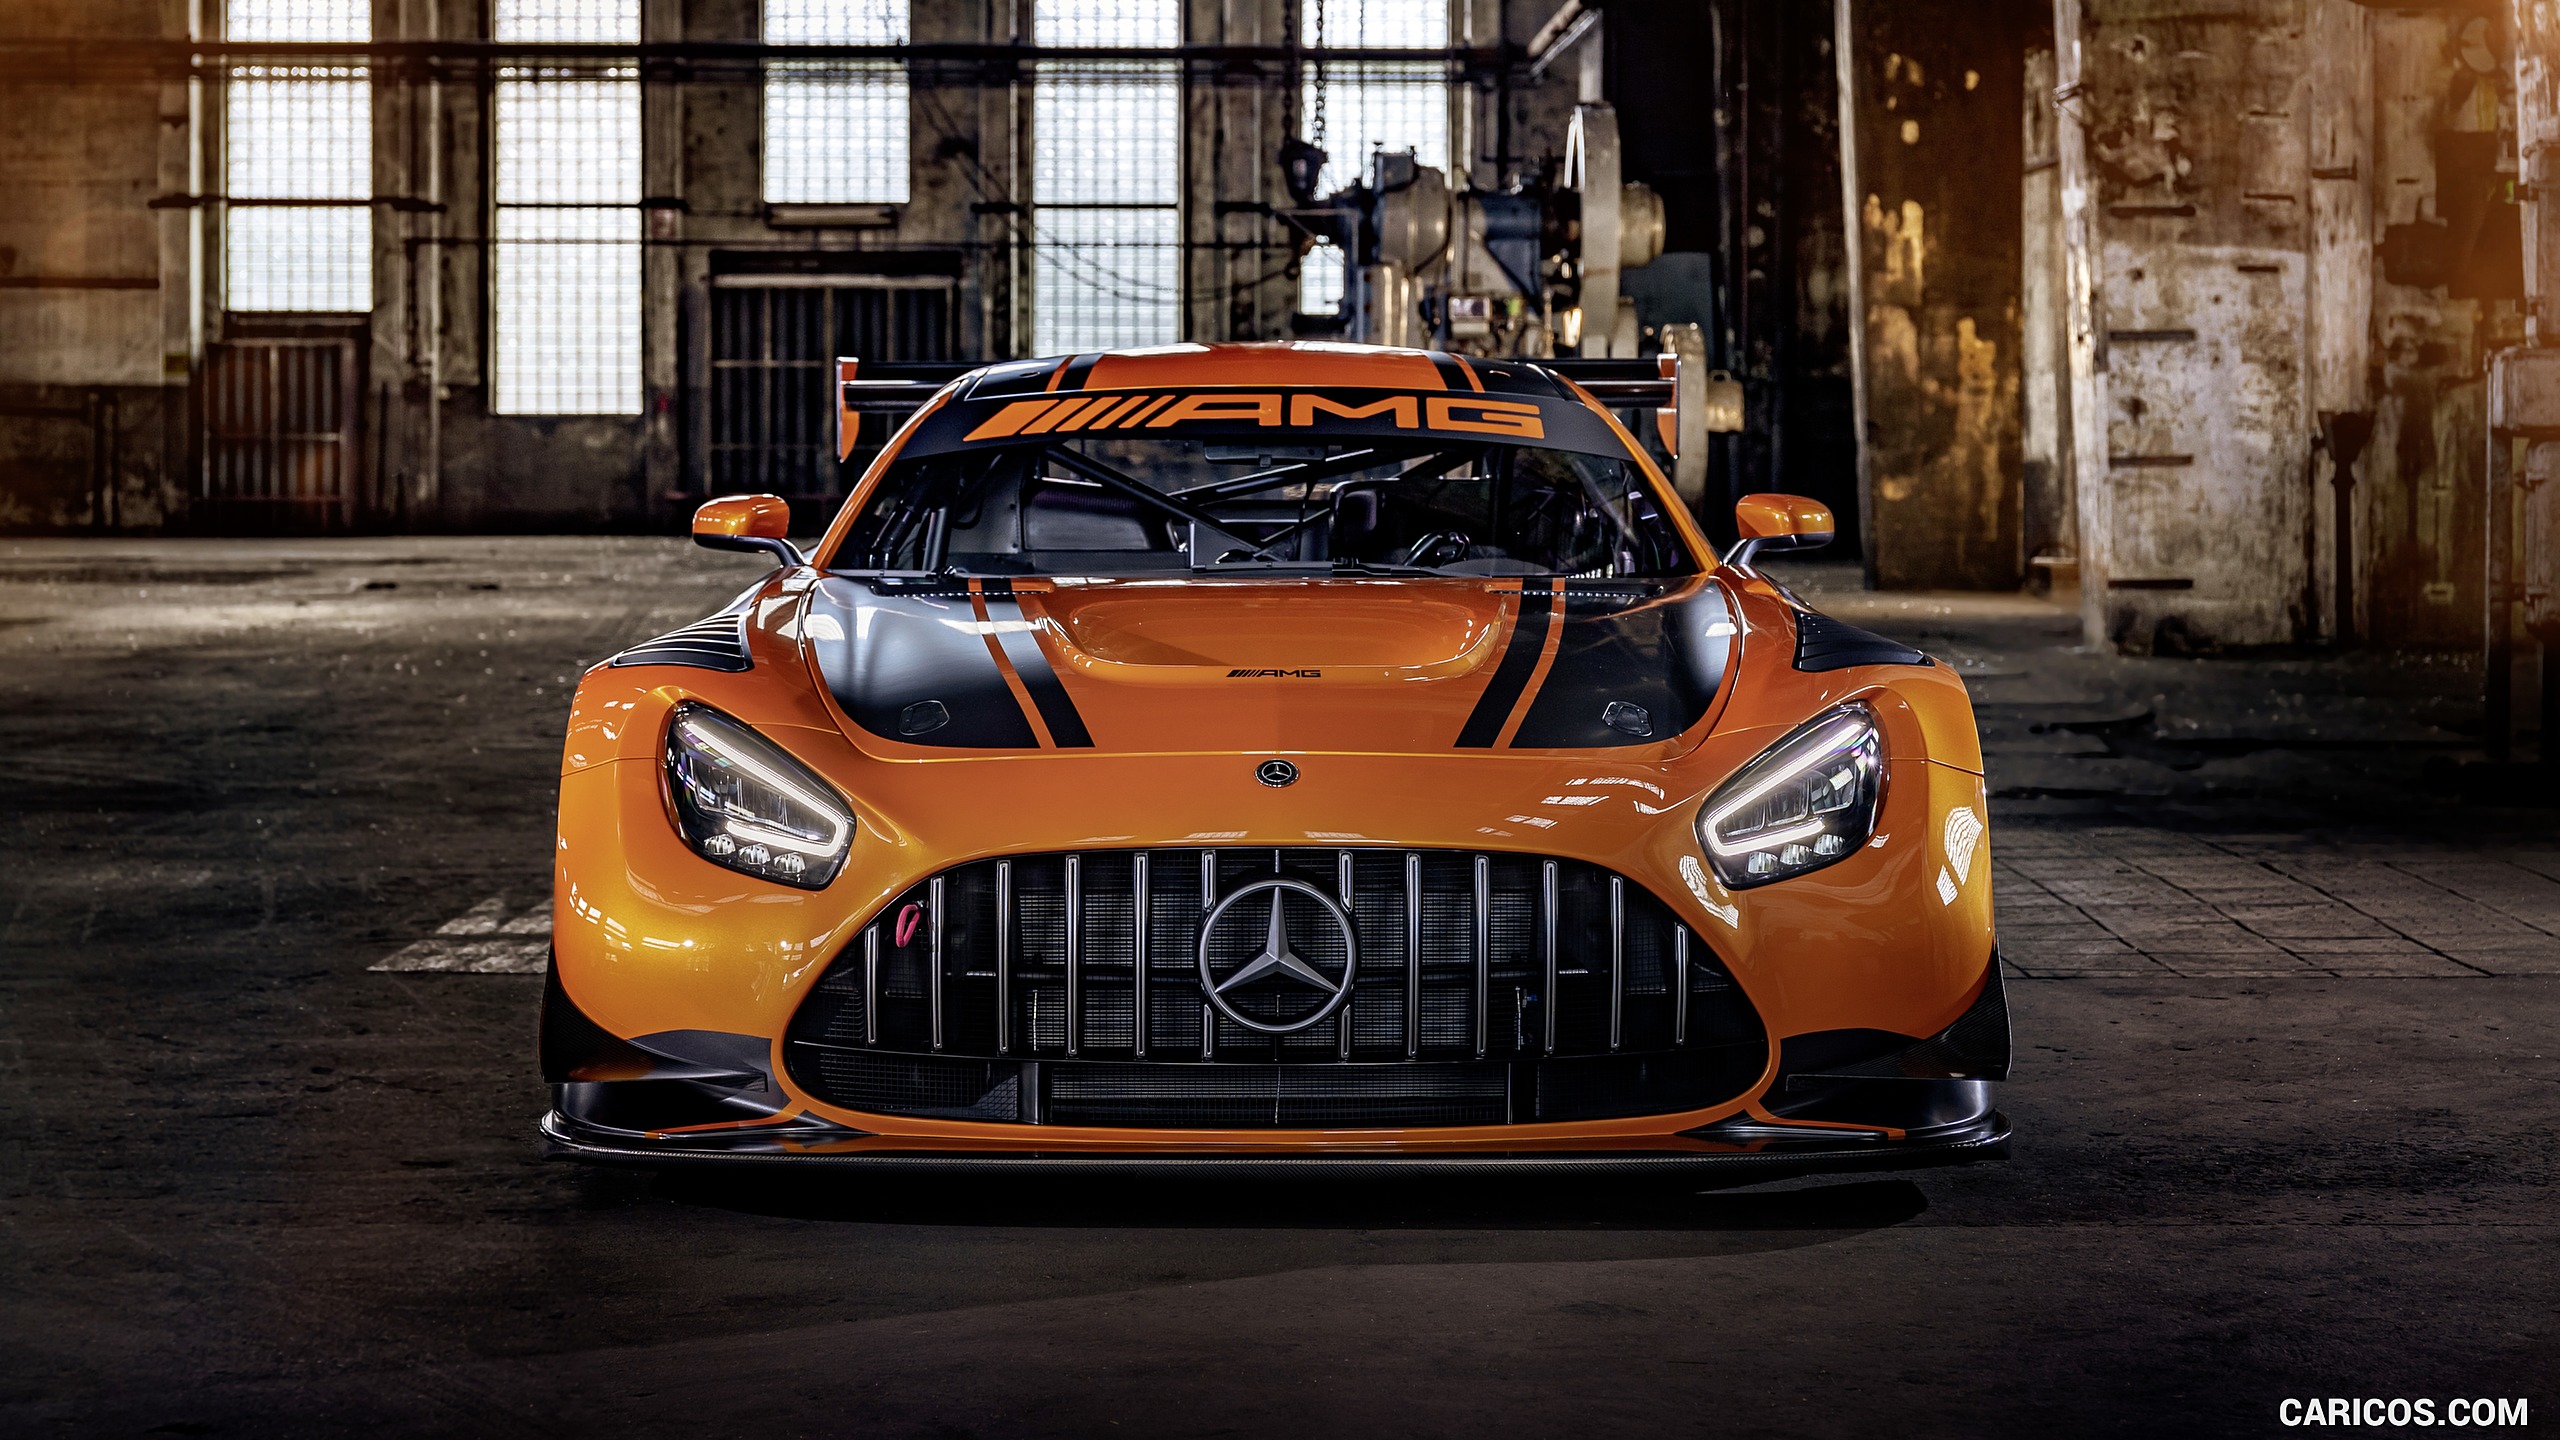 2020 Mercedes-AMG GT3 - Front, #5 of 12